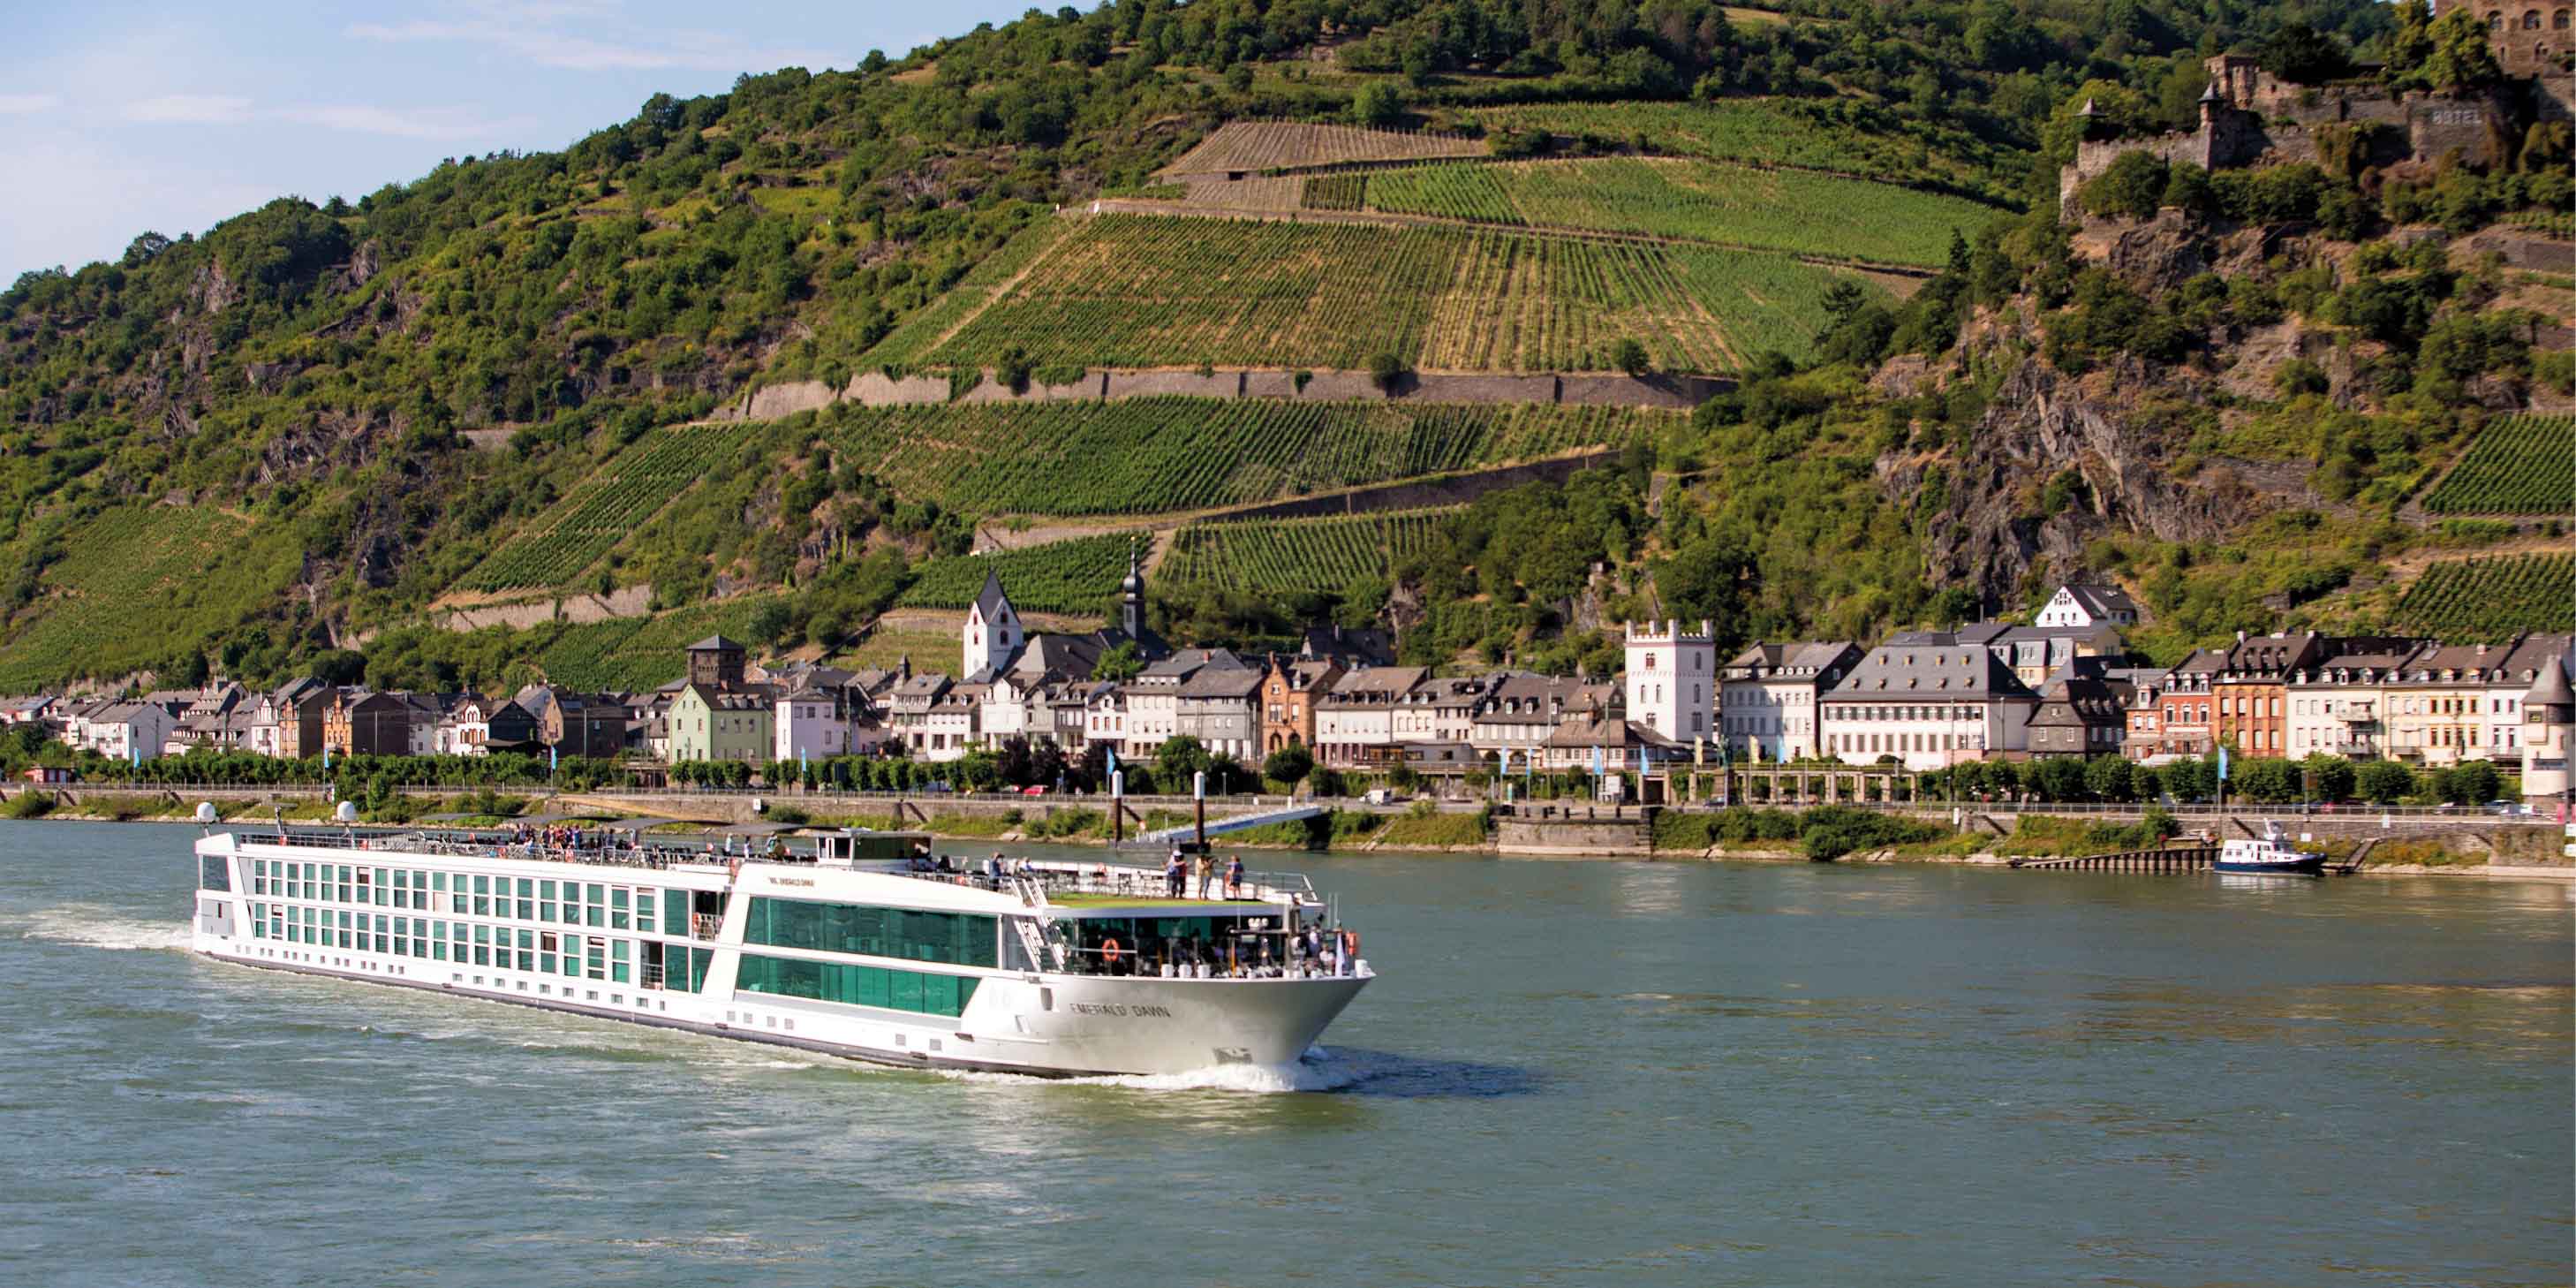 Luxury cruise ship sailing the Rhine River past a quintessential Europe town, with rolling hills in the background